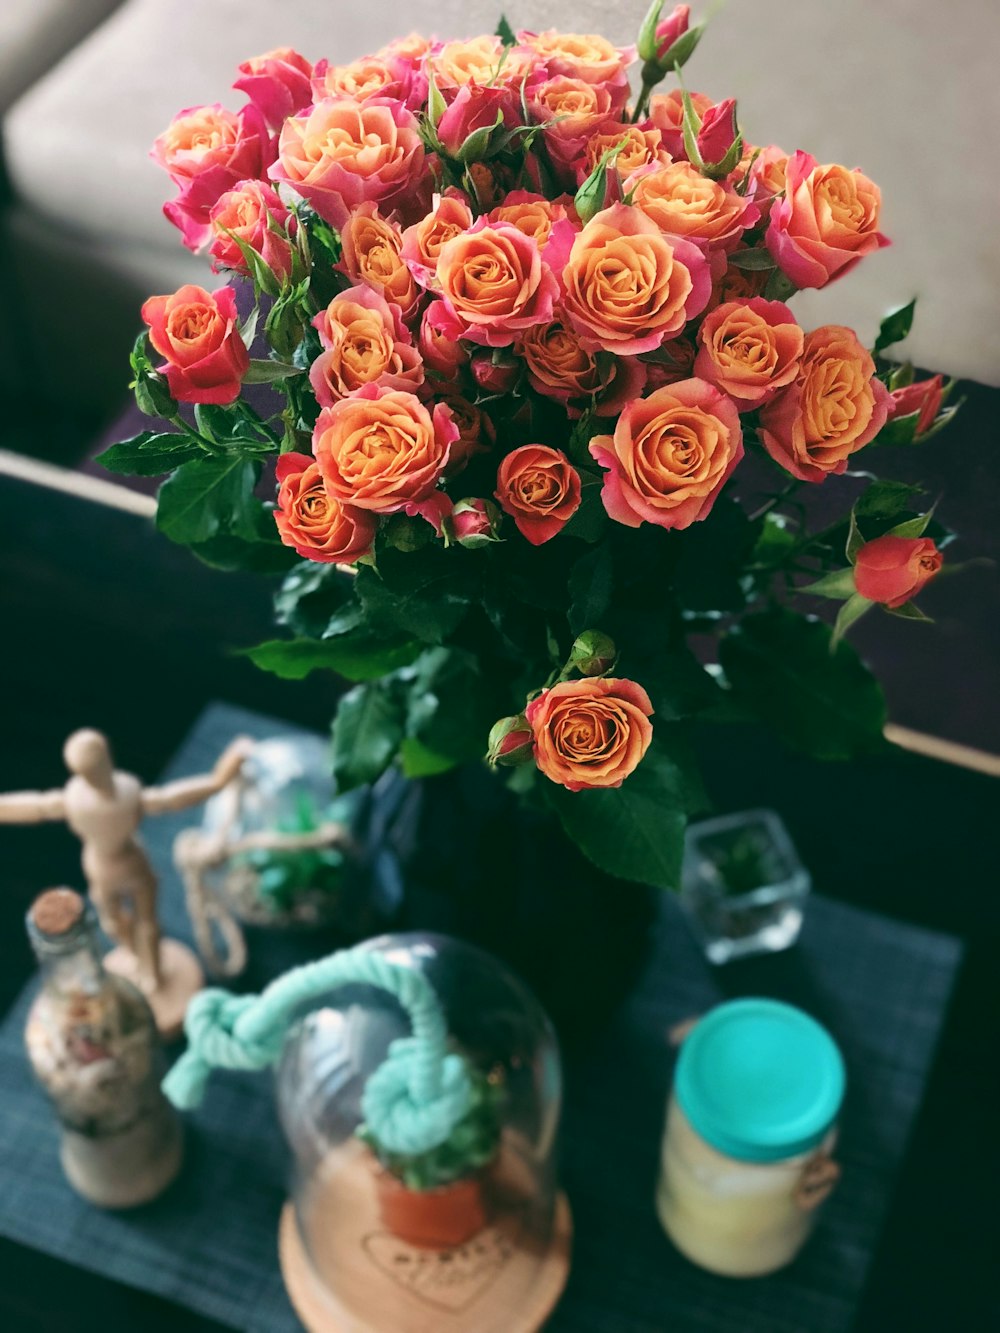 rose bouquet and clear glass jar